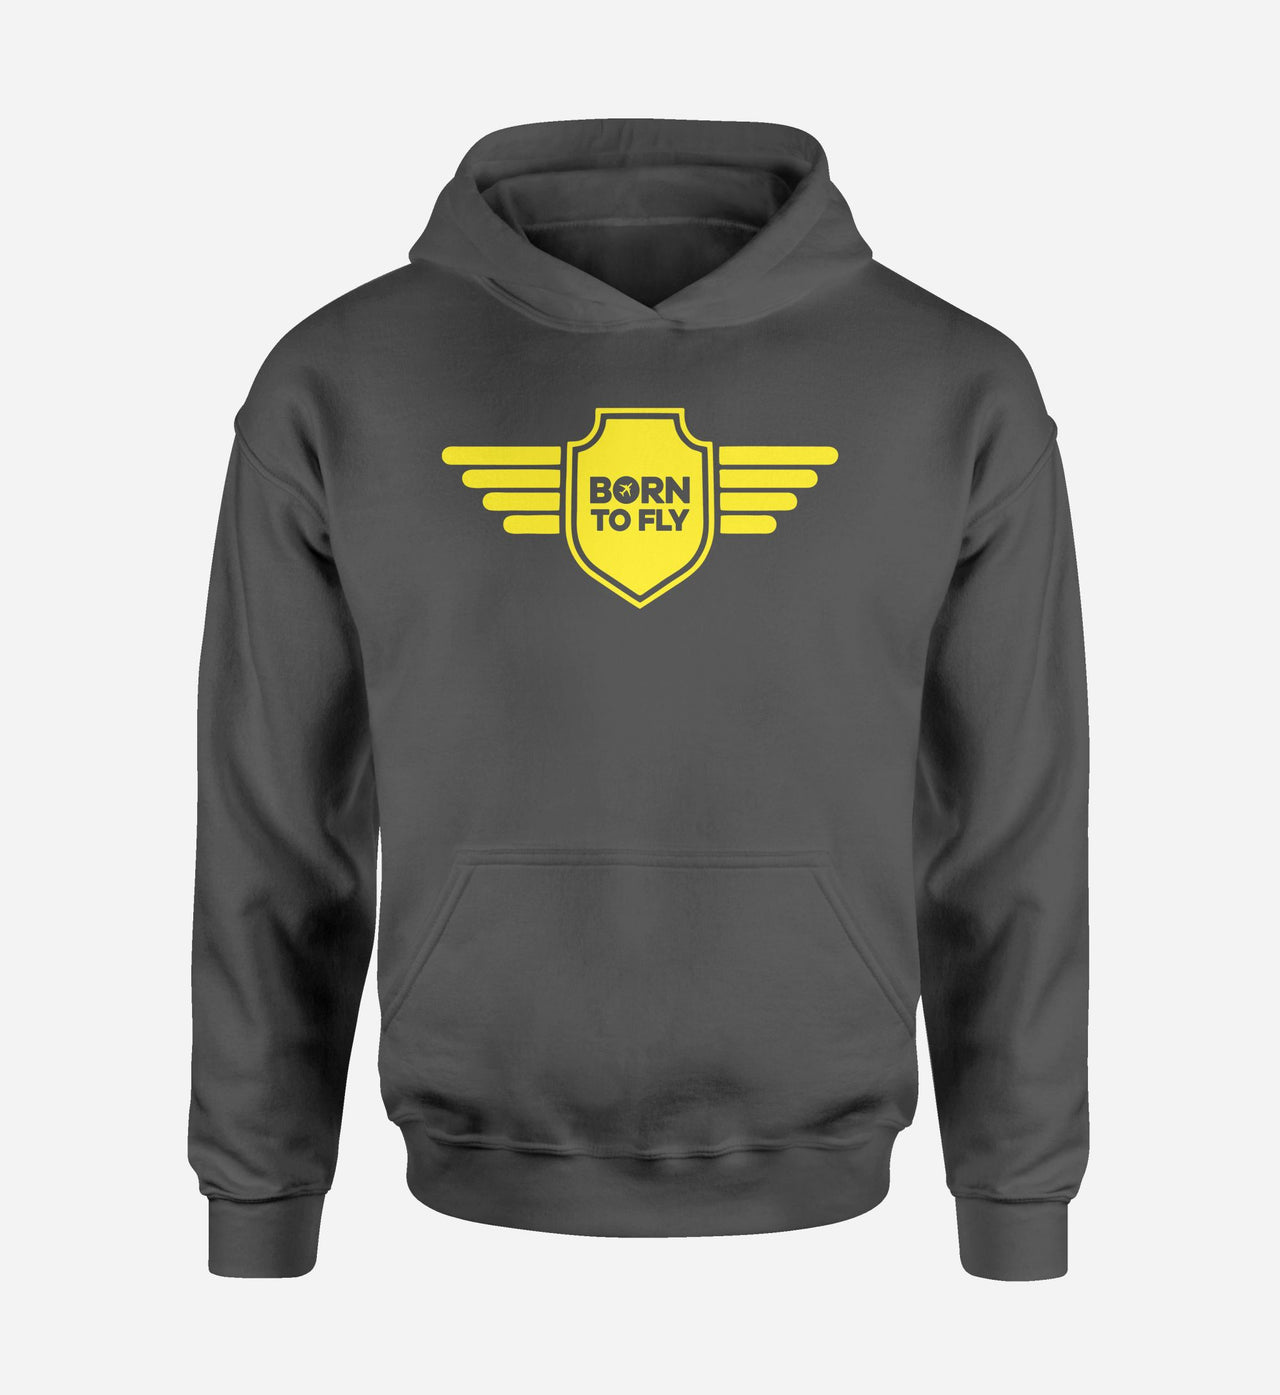 Born To Fly & Badge Designed Hoodies